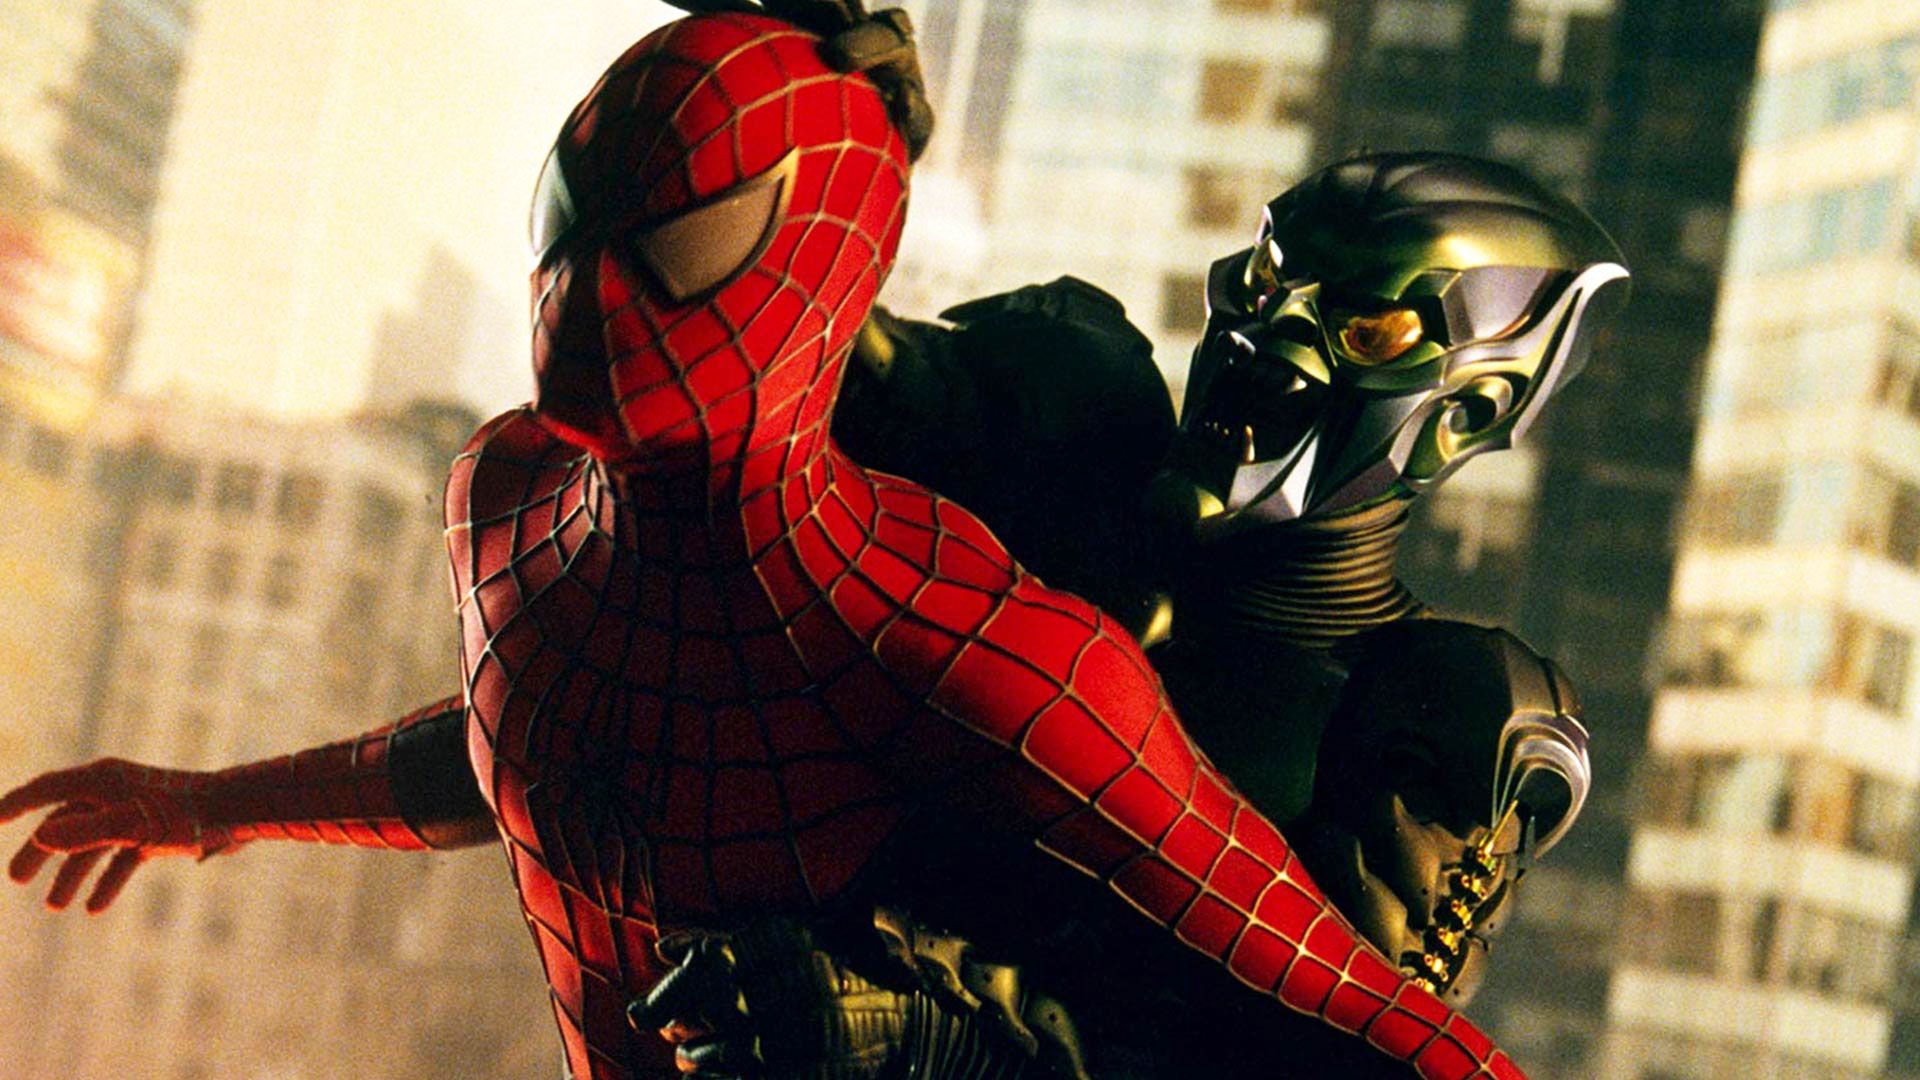 Sam Raimi's Spider-Man Movies to Stream on Crackle for Free